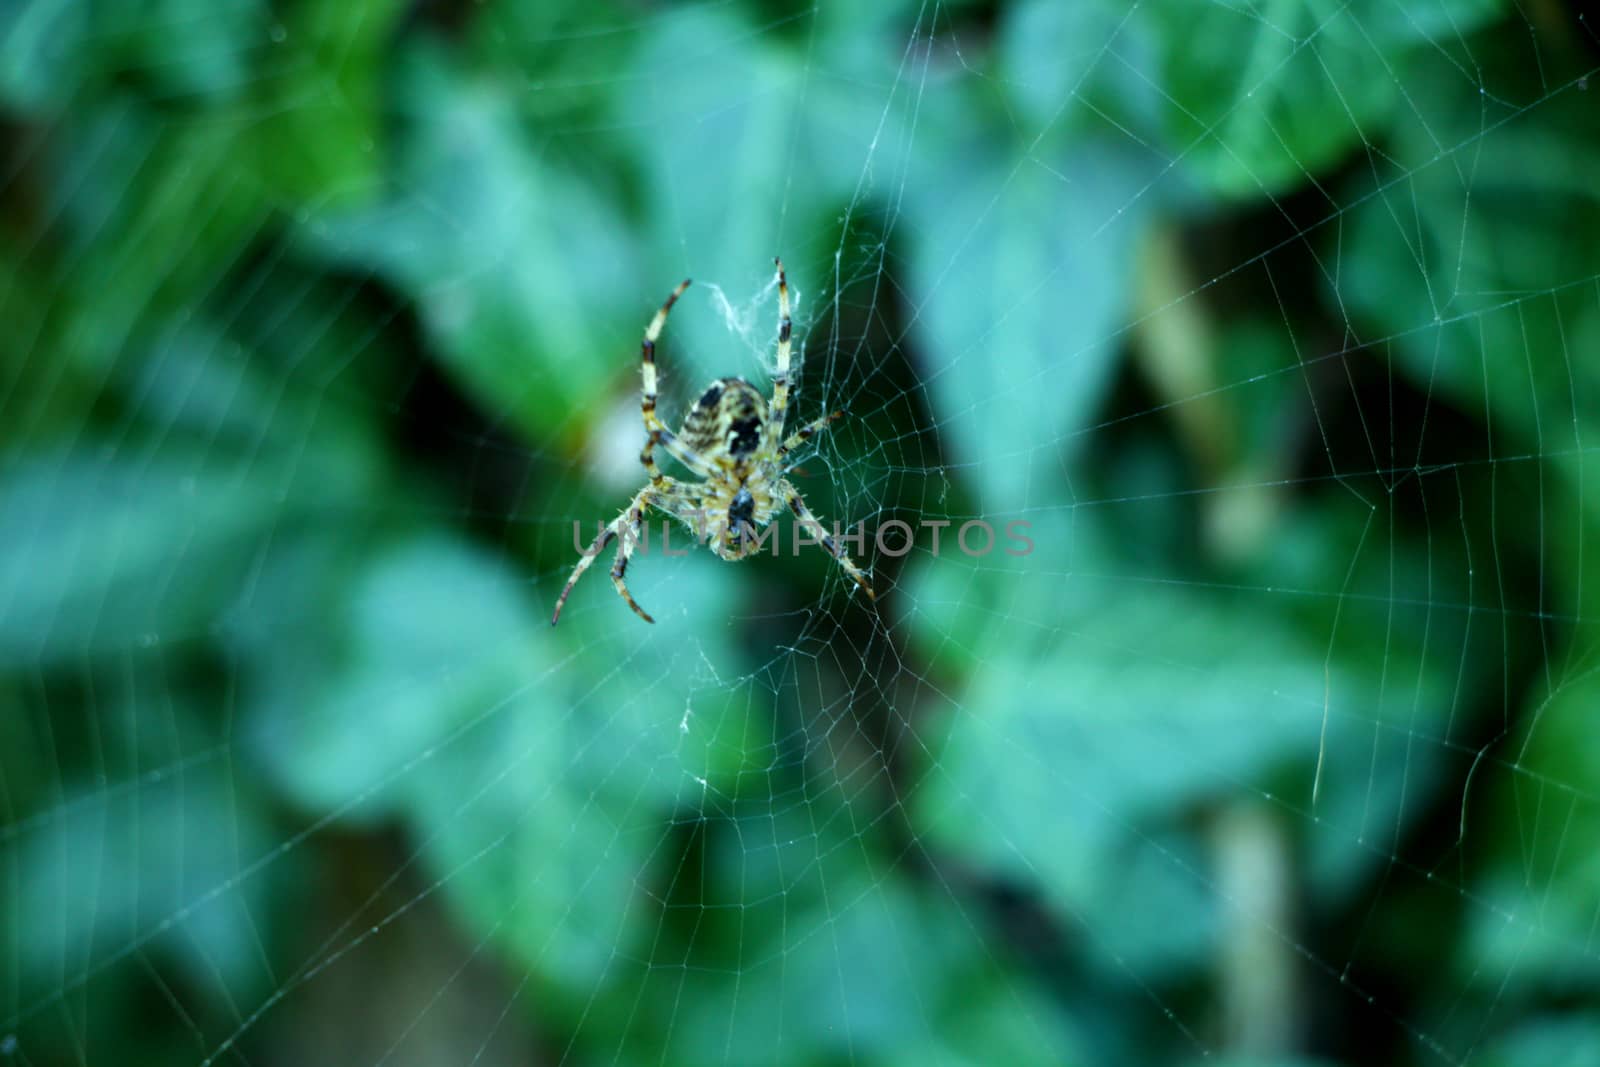 A cross spider sitting in the middle of its spiderweb in fall.